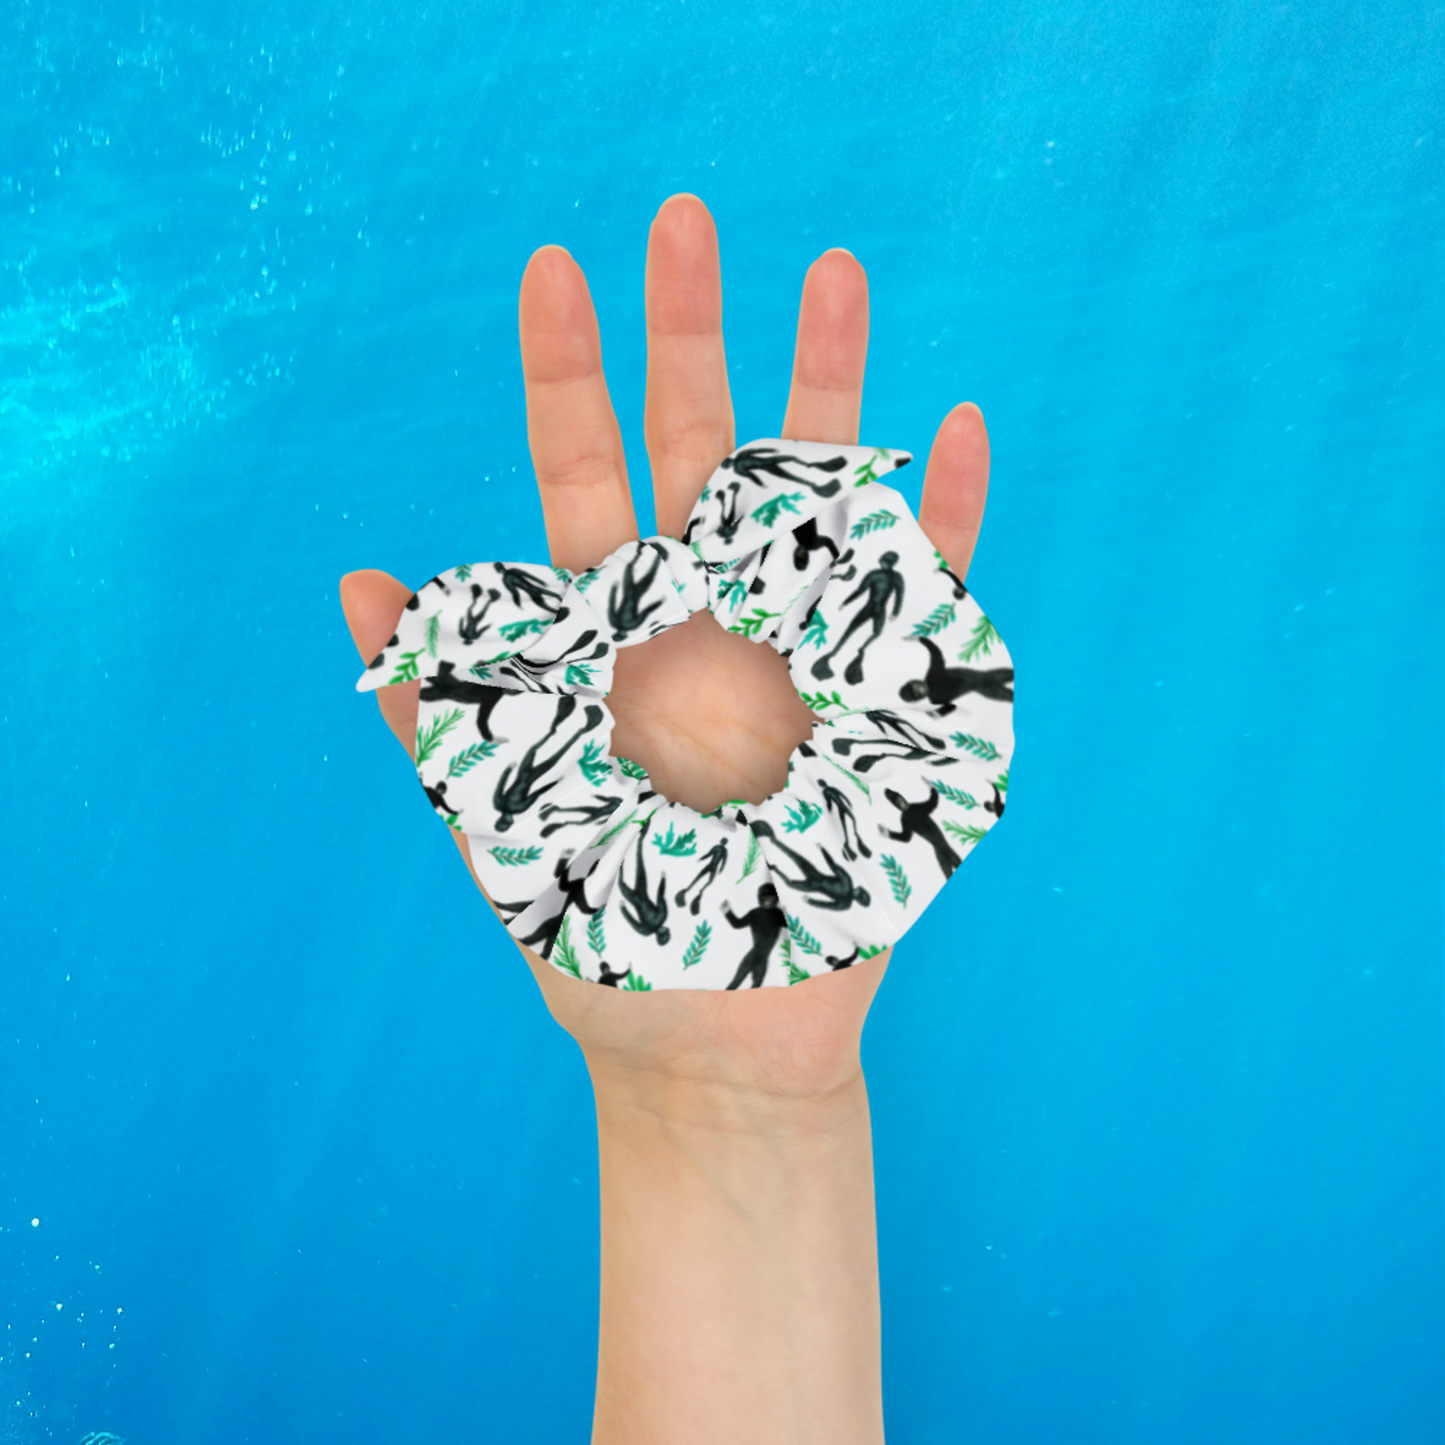 Hand Holding Scuba Diver Scrunchie Hair Tie - Connected Clothing Company - Ethical & Sustainable Apparel - 10% donated to Mission Blue ocean conservation